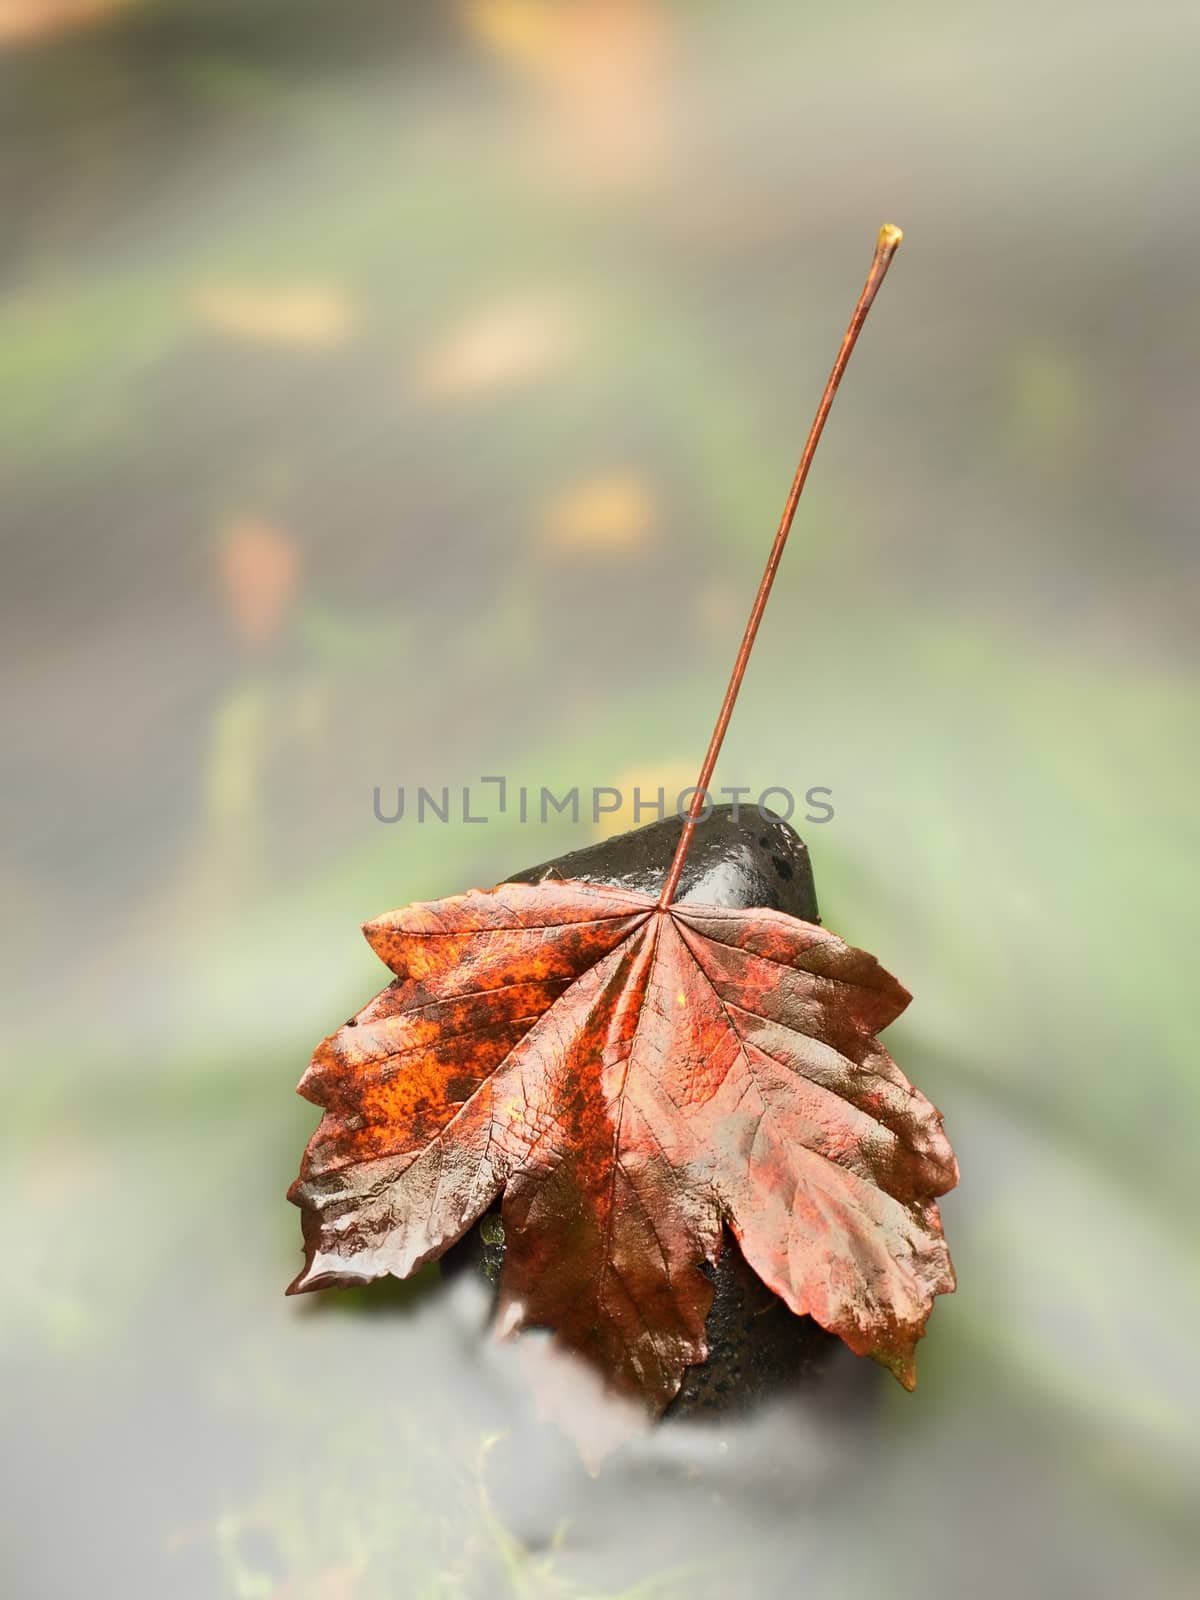 The colorful broken leaf from maple tree on basalt stones in blurred water by rdonar2